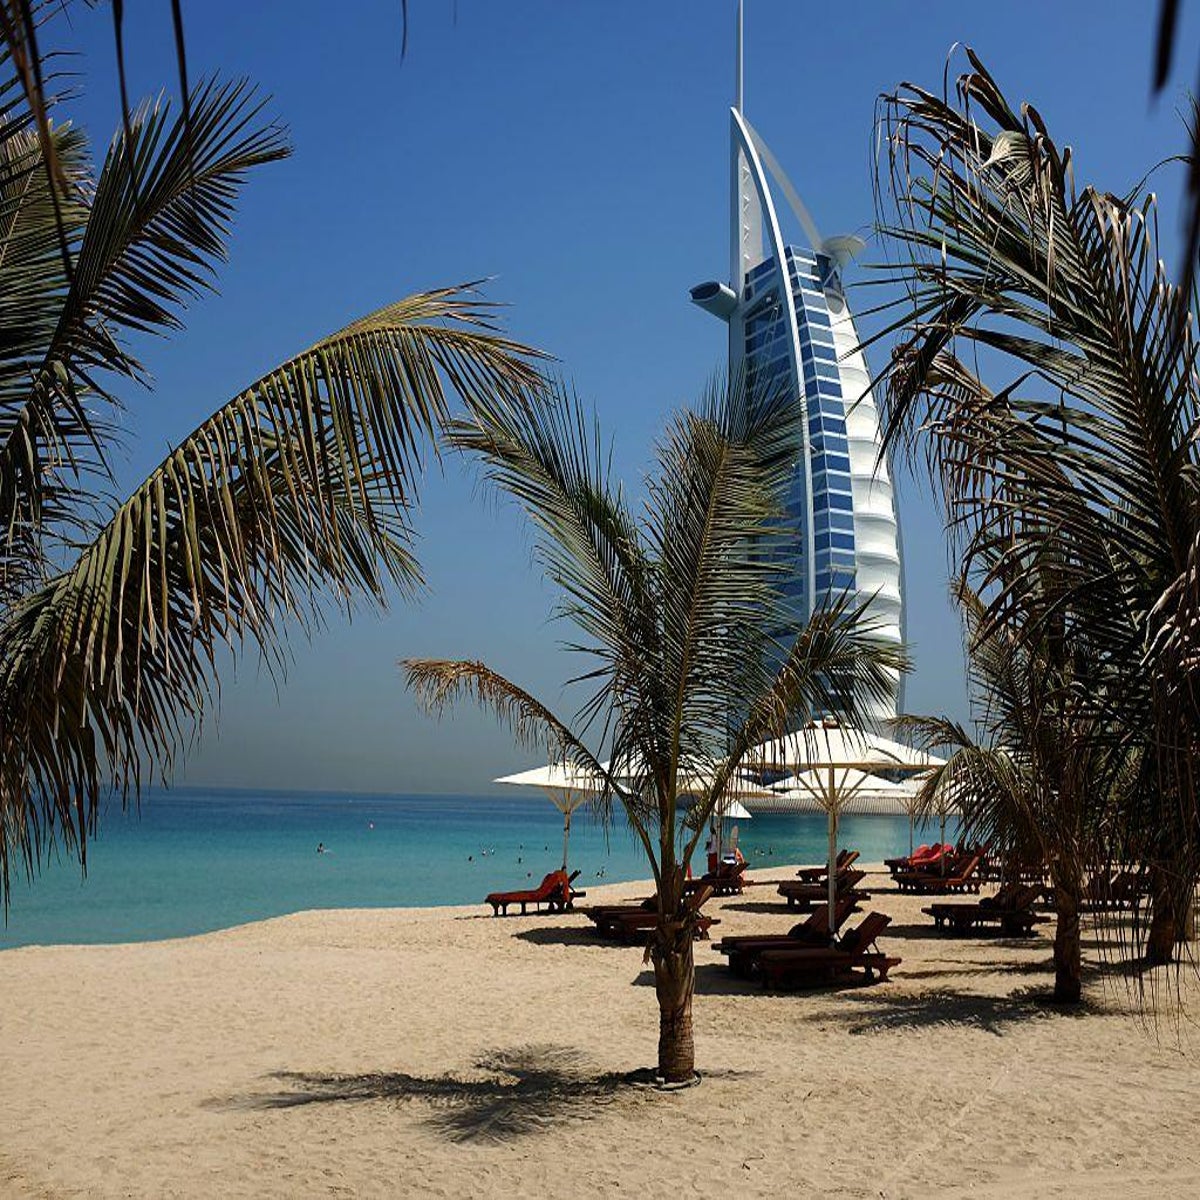 Naked Couples At Beach Tanning - What not to do in Dubai as a tourist | The Independent | The Independent